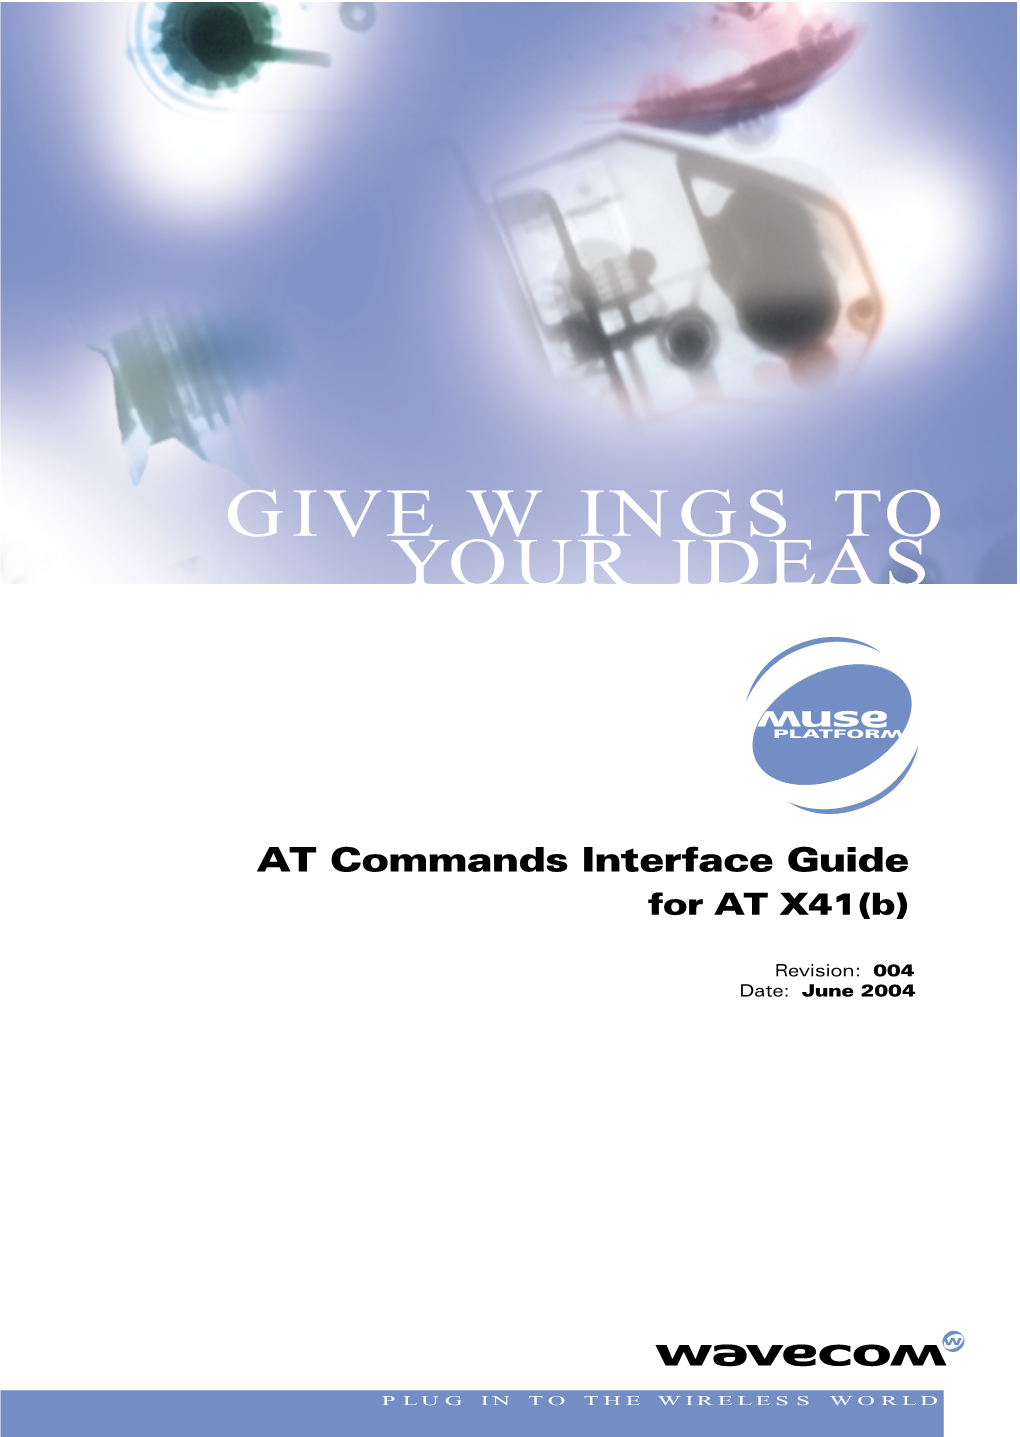 AT Commands Interface Guide for X41b